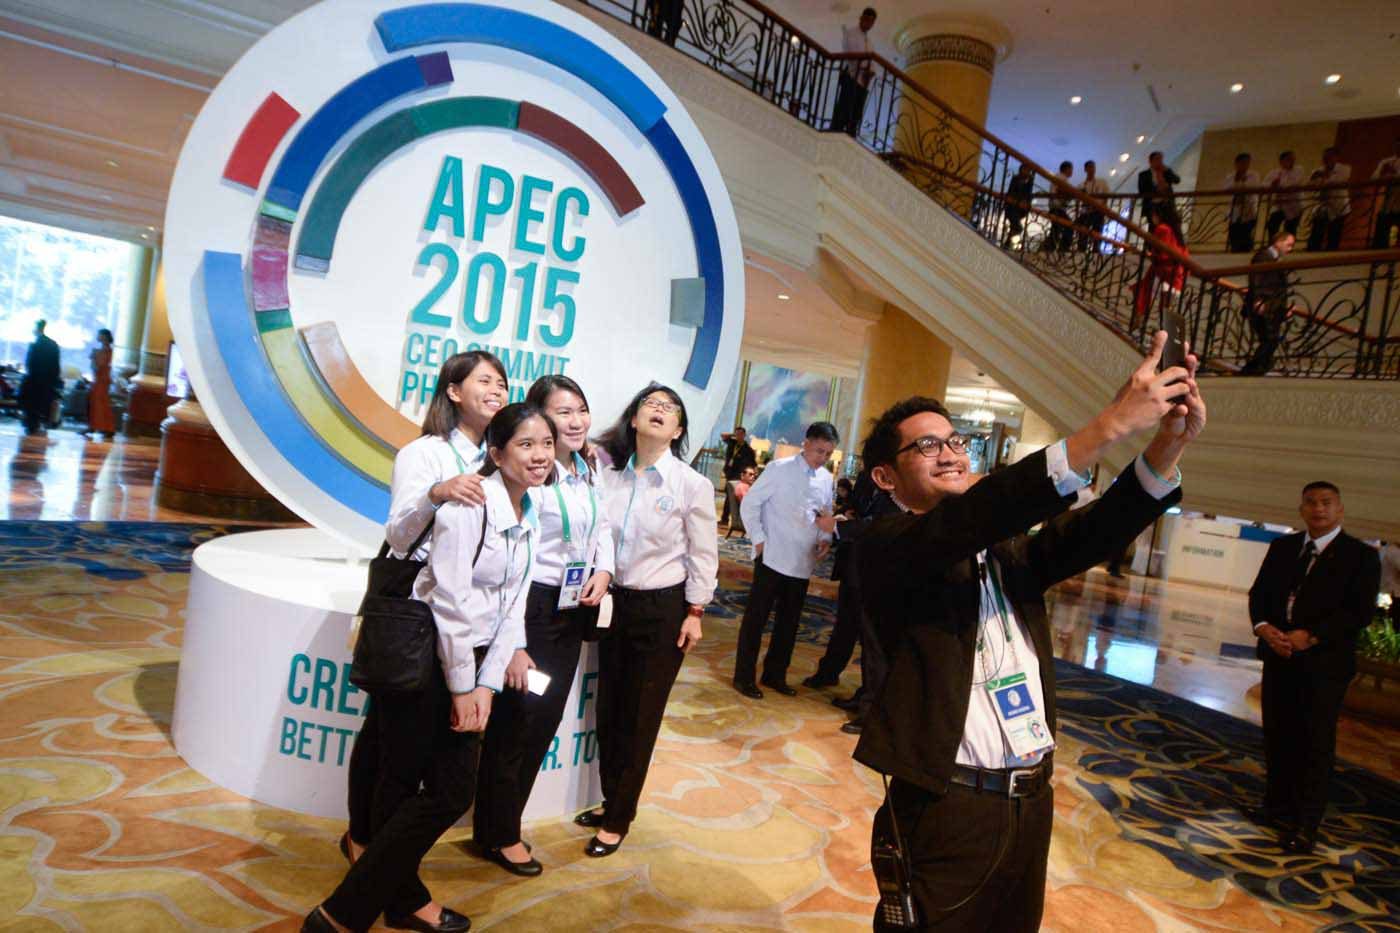 IN PHOTOS: Behind the scenes of the APEC Summit